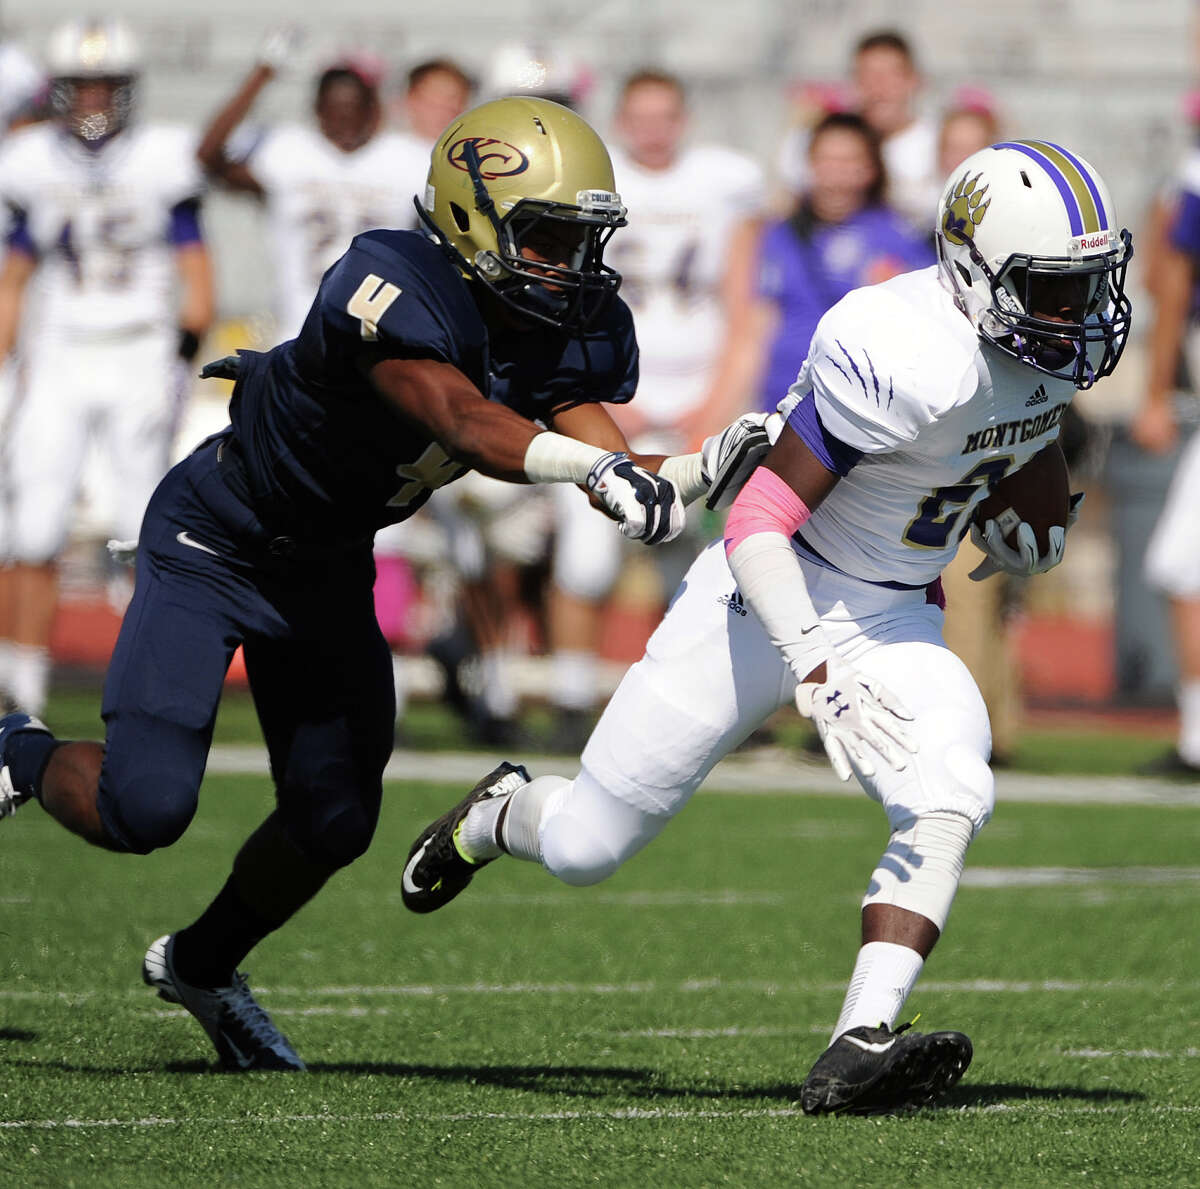 Montgomery wide receiver Anthony Thomas, right, escapes the tackle of Klein Collins defensive back Joseph Graves en route to a 63-yard touchdown during the first half of a high school football game, Saturday, October 25, 2014, at Klein Memorial Stadium in Houston.